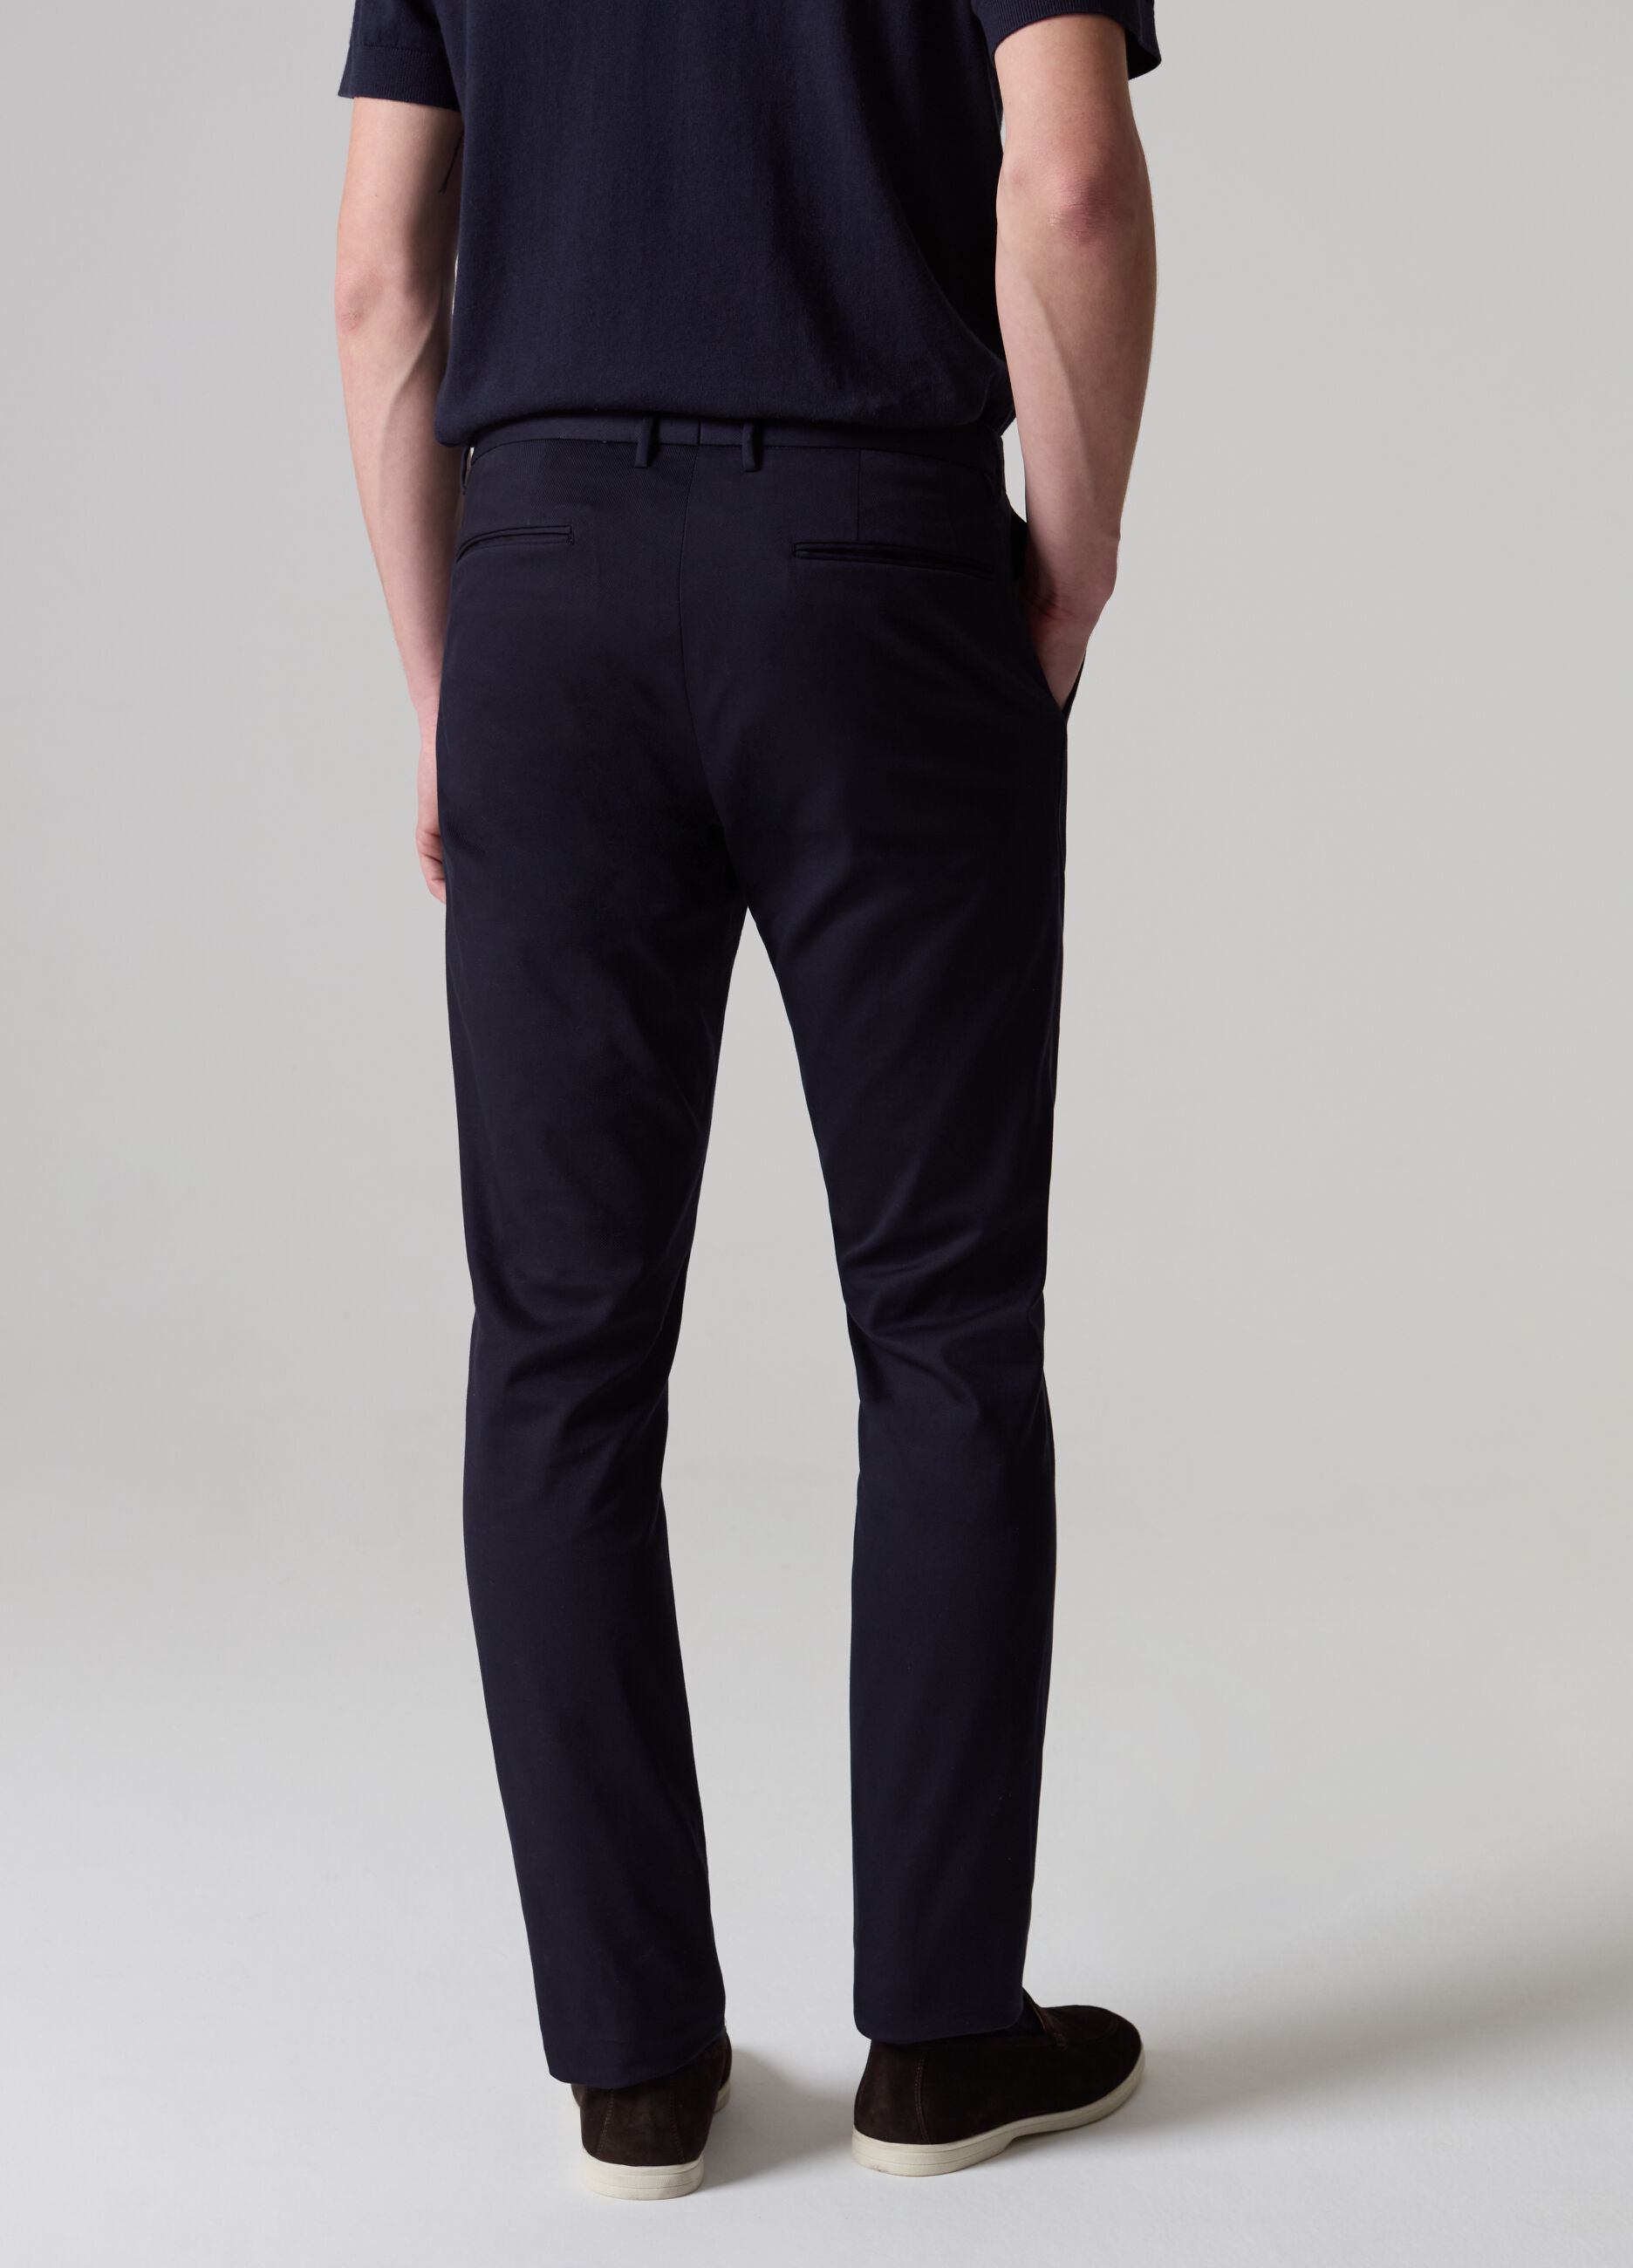 Contemporary chino trousers with five pockets